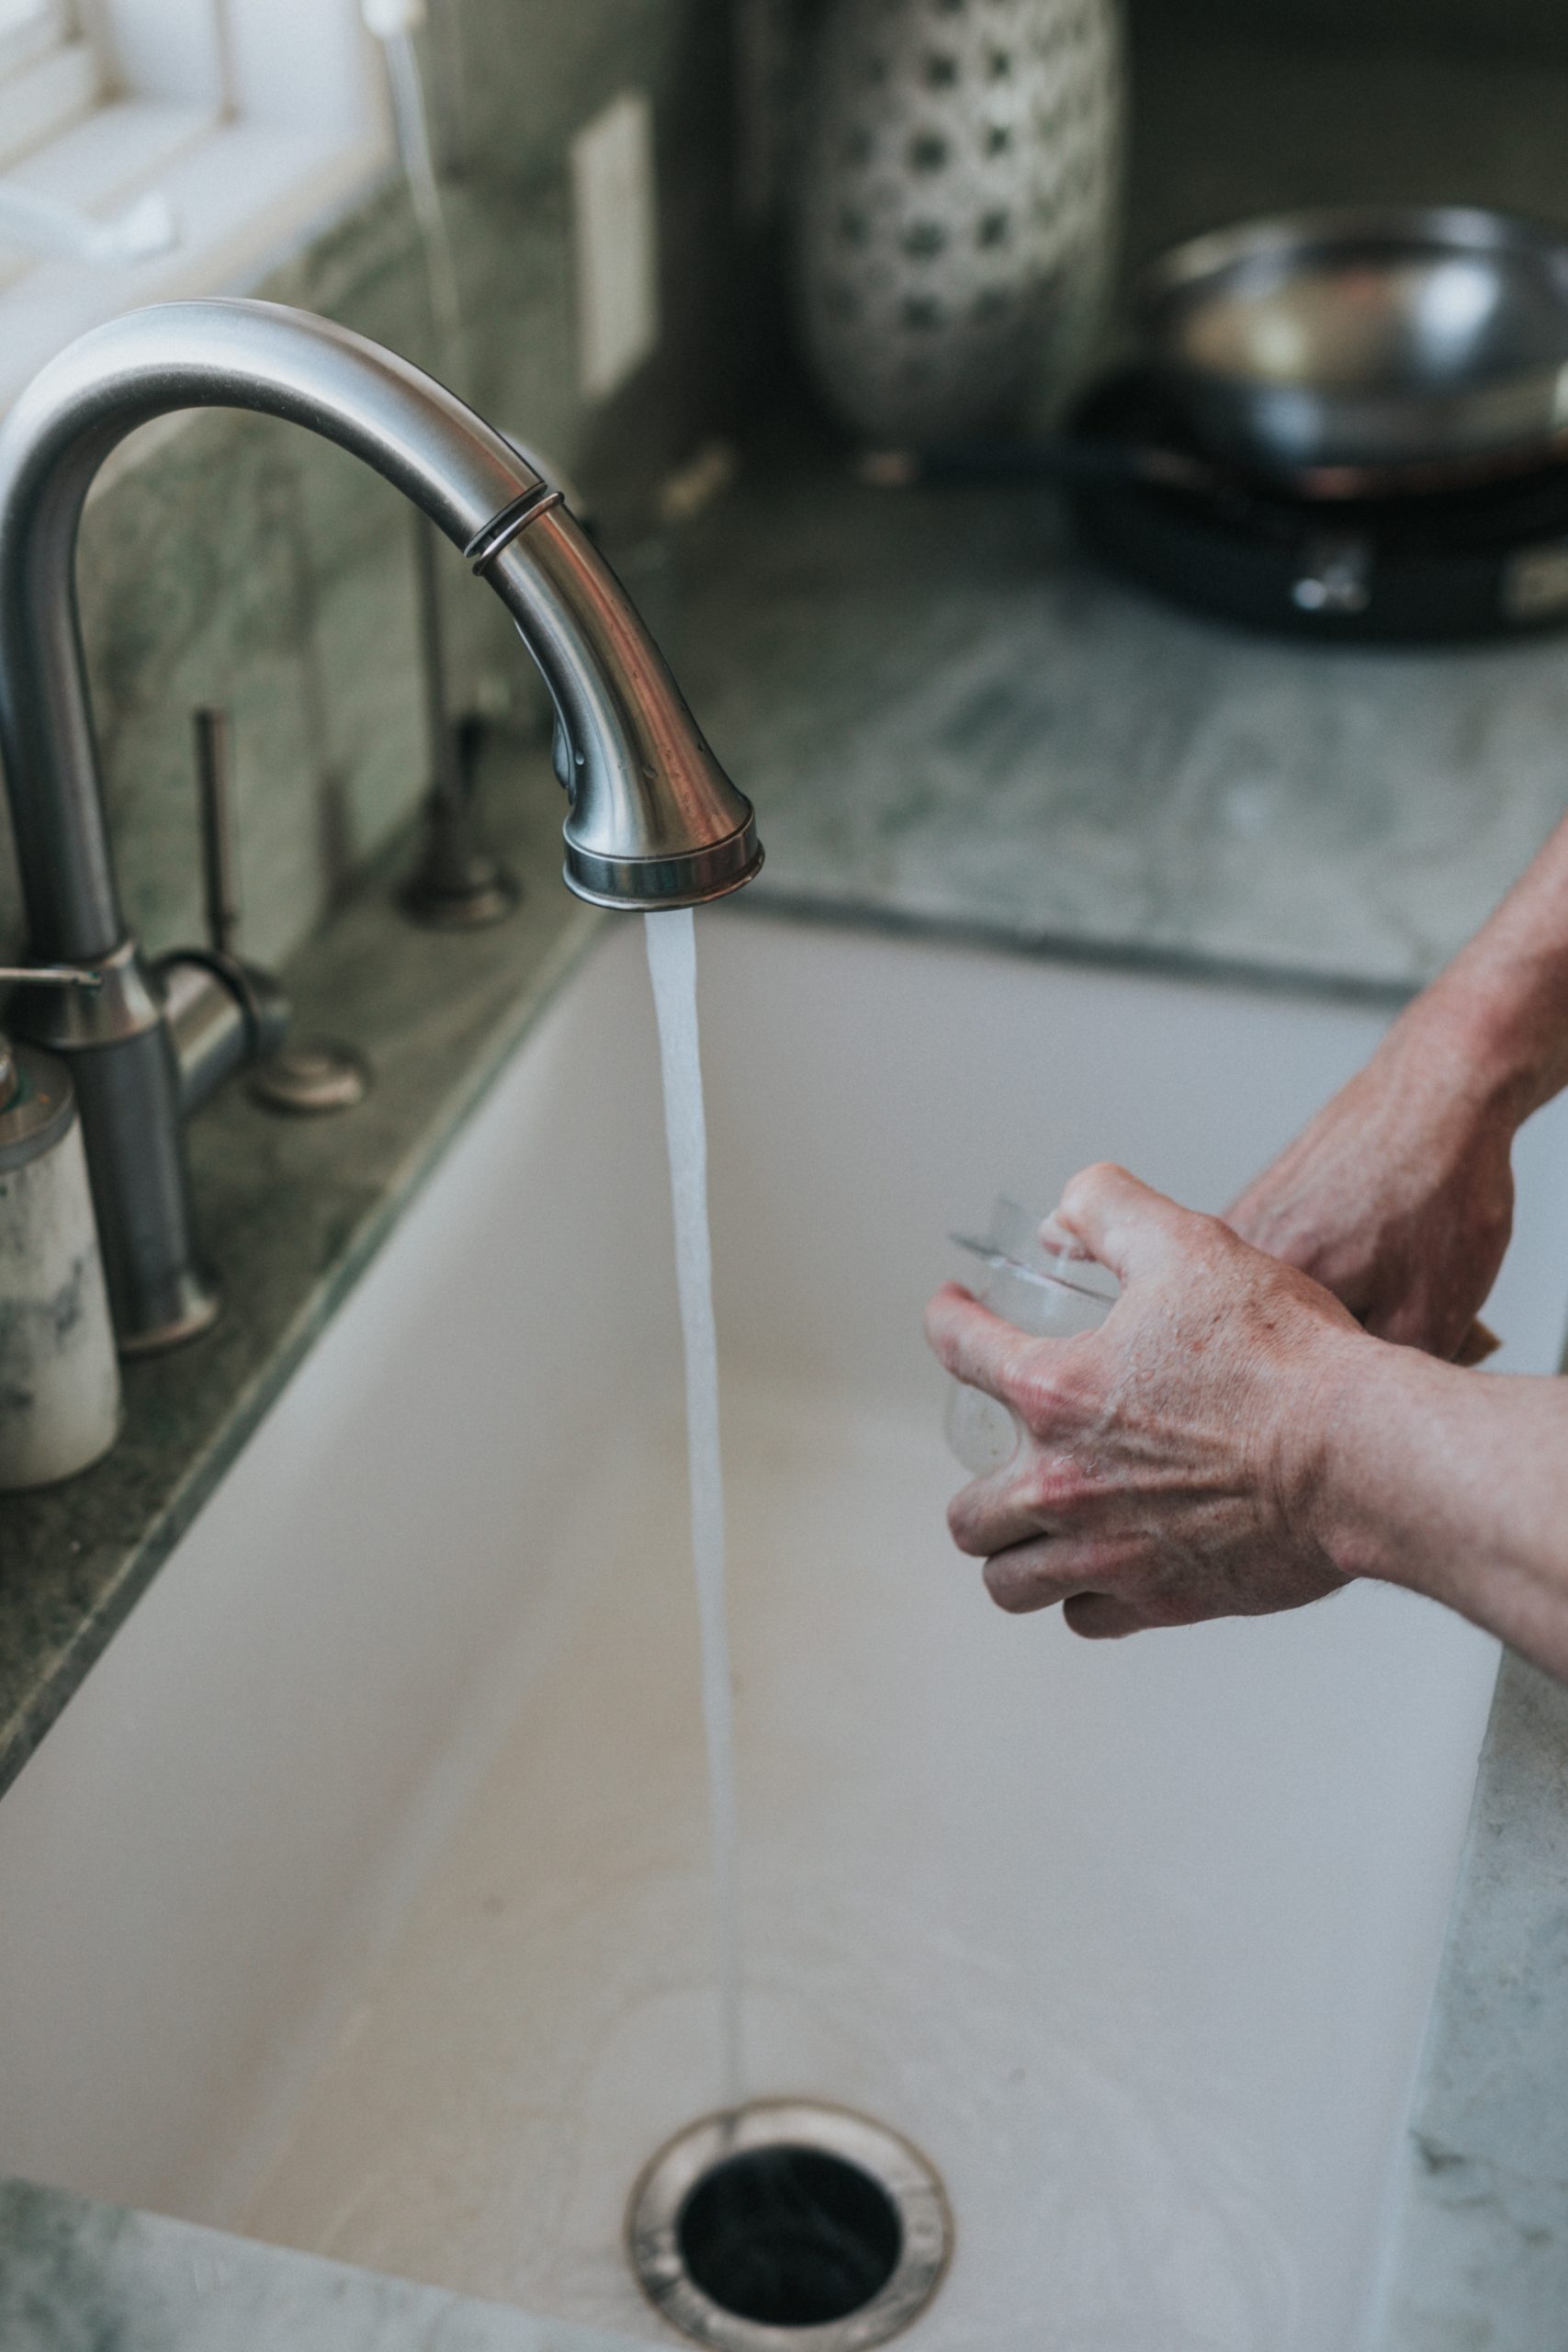 person washing hand on faucet